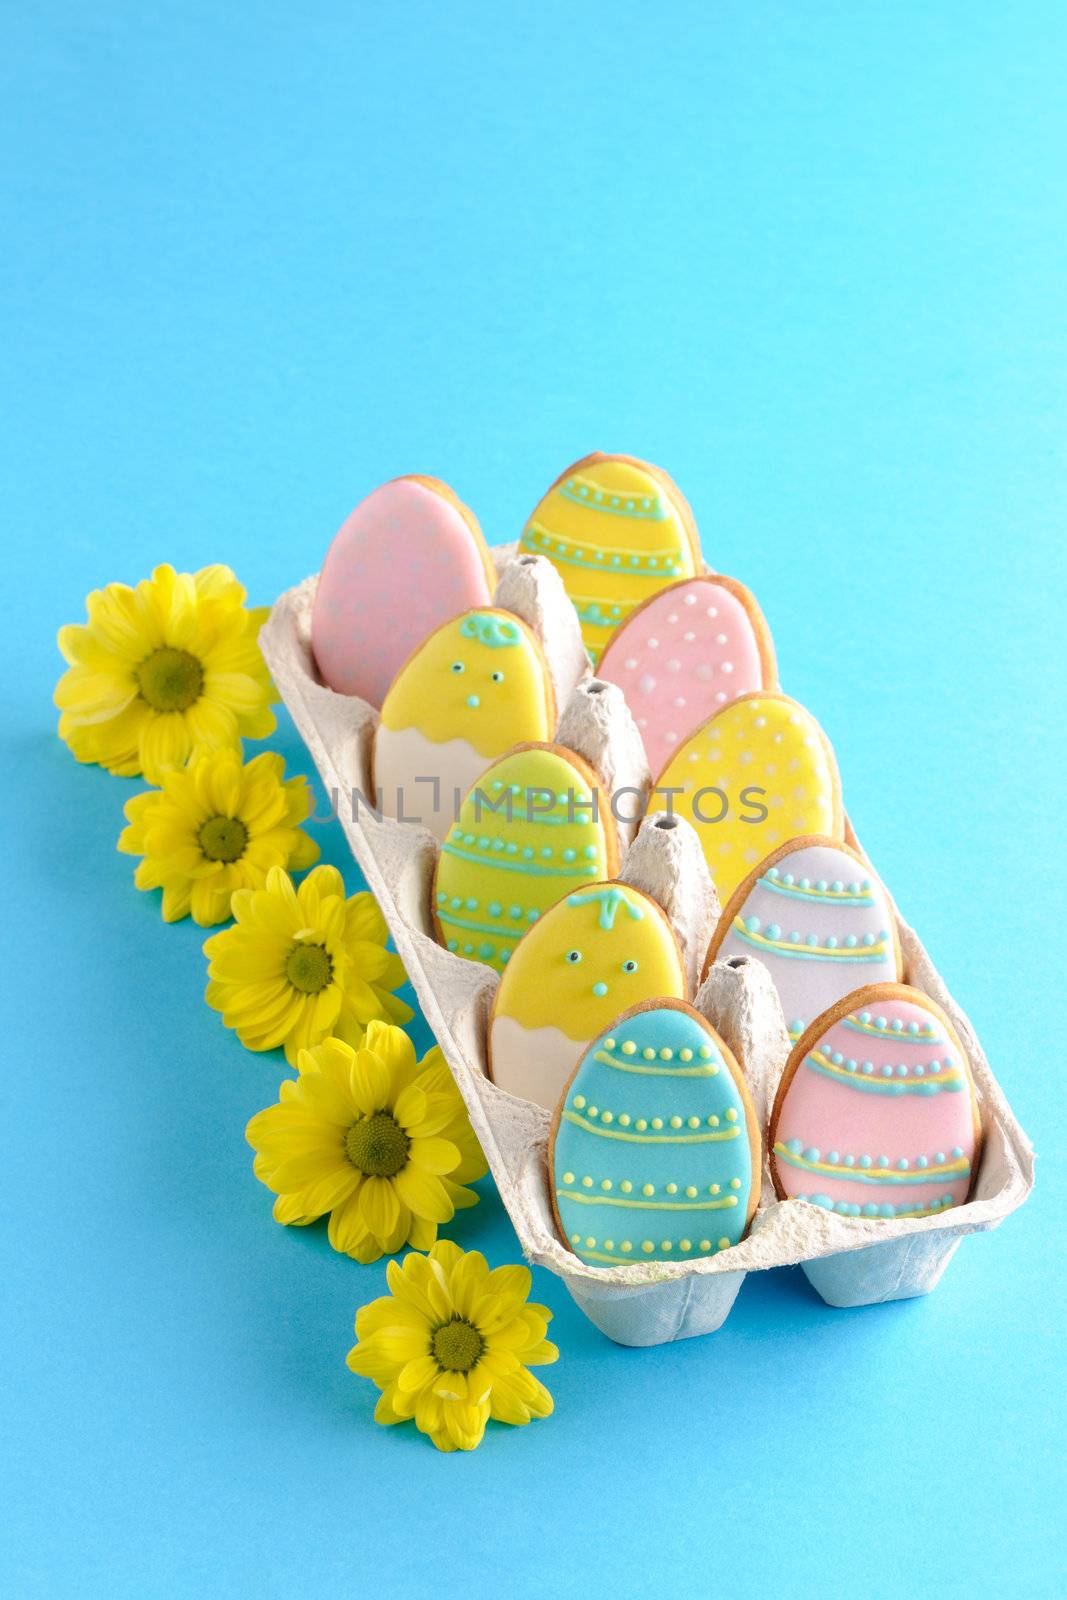 Easter homemade gingerbread cookie over blue